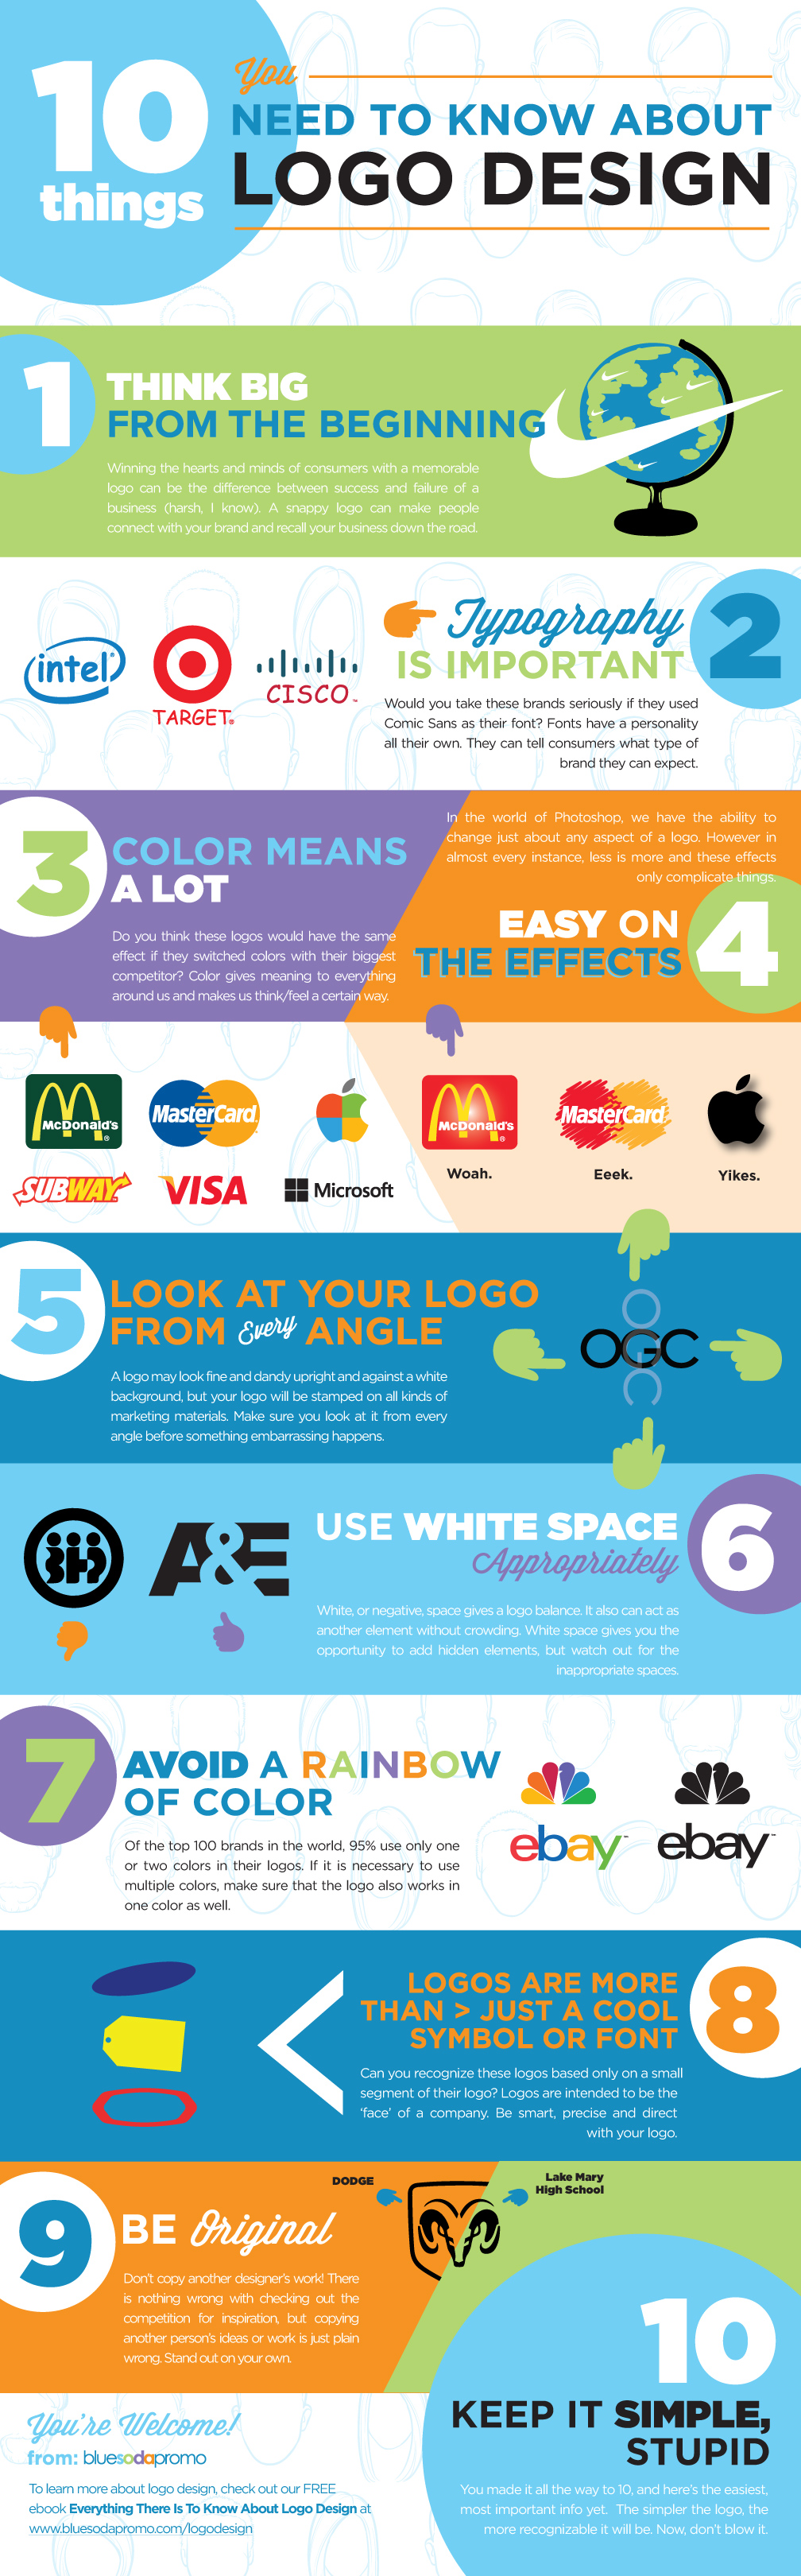 10 Things You Need To Know About Logo Design (INFOGRAPHIC)